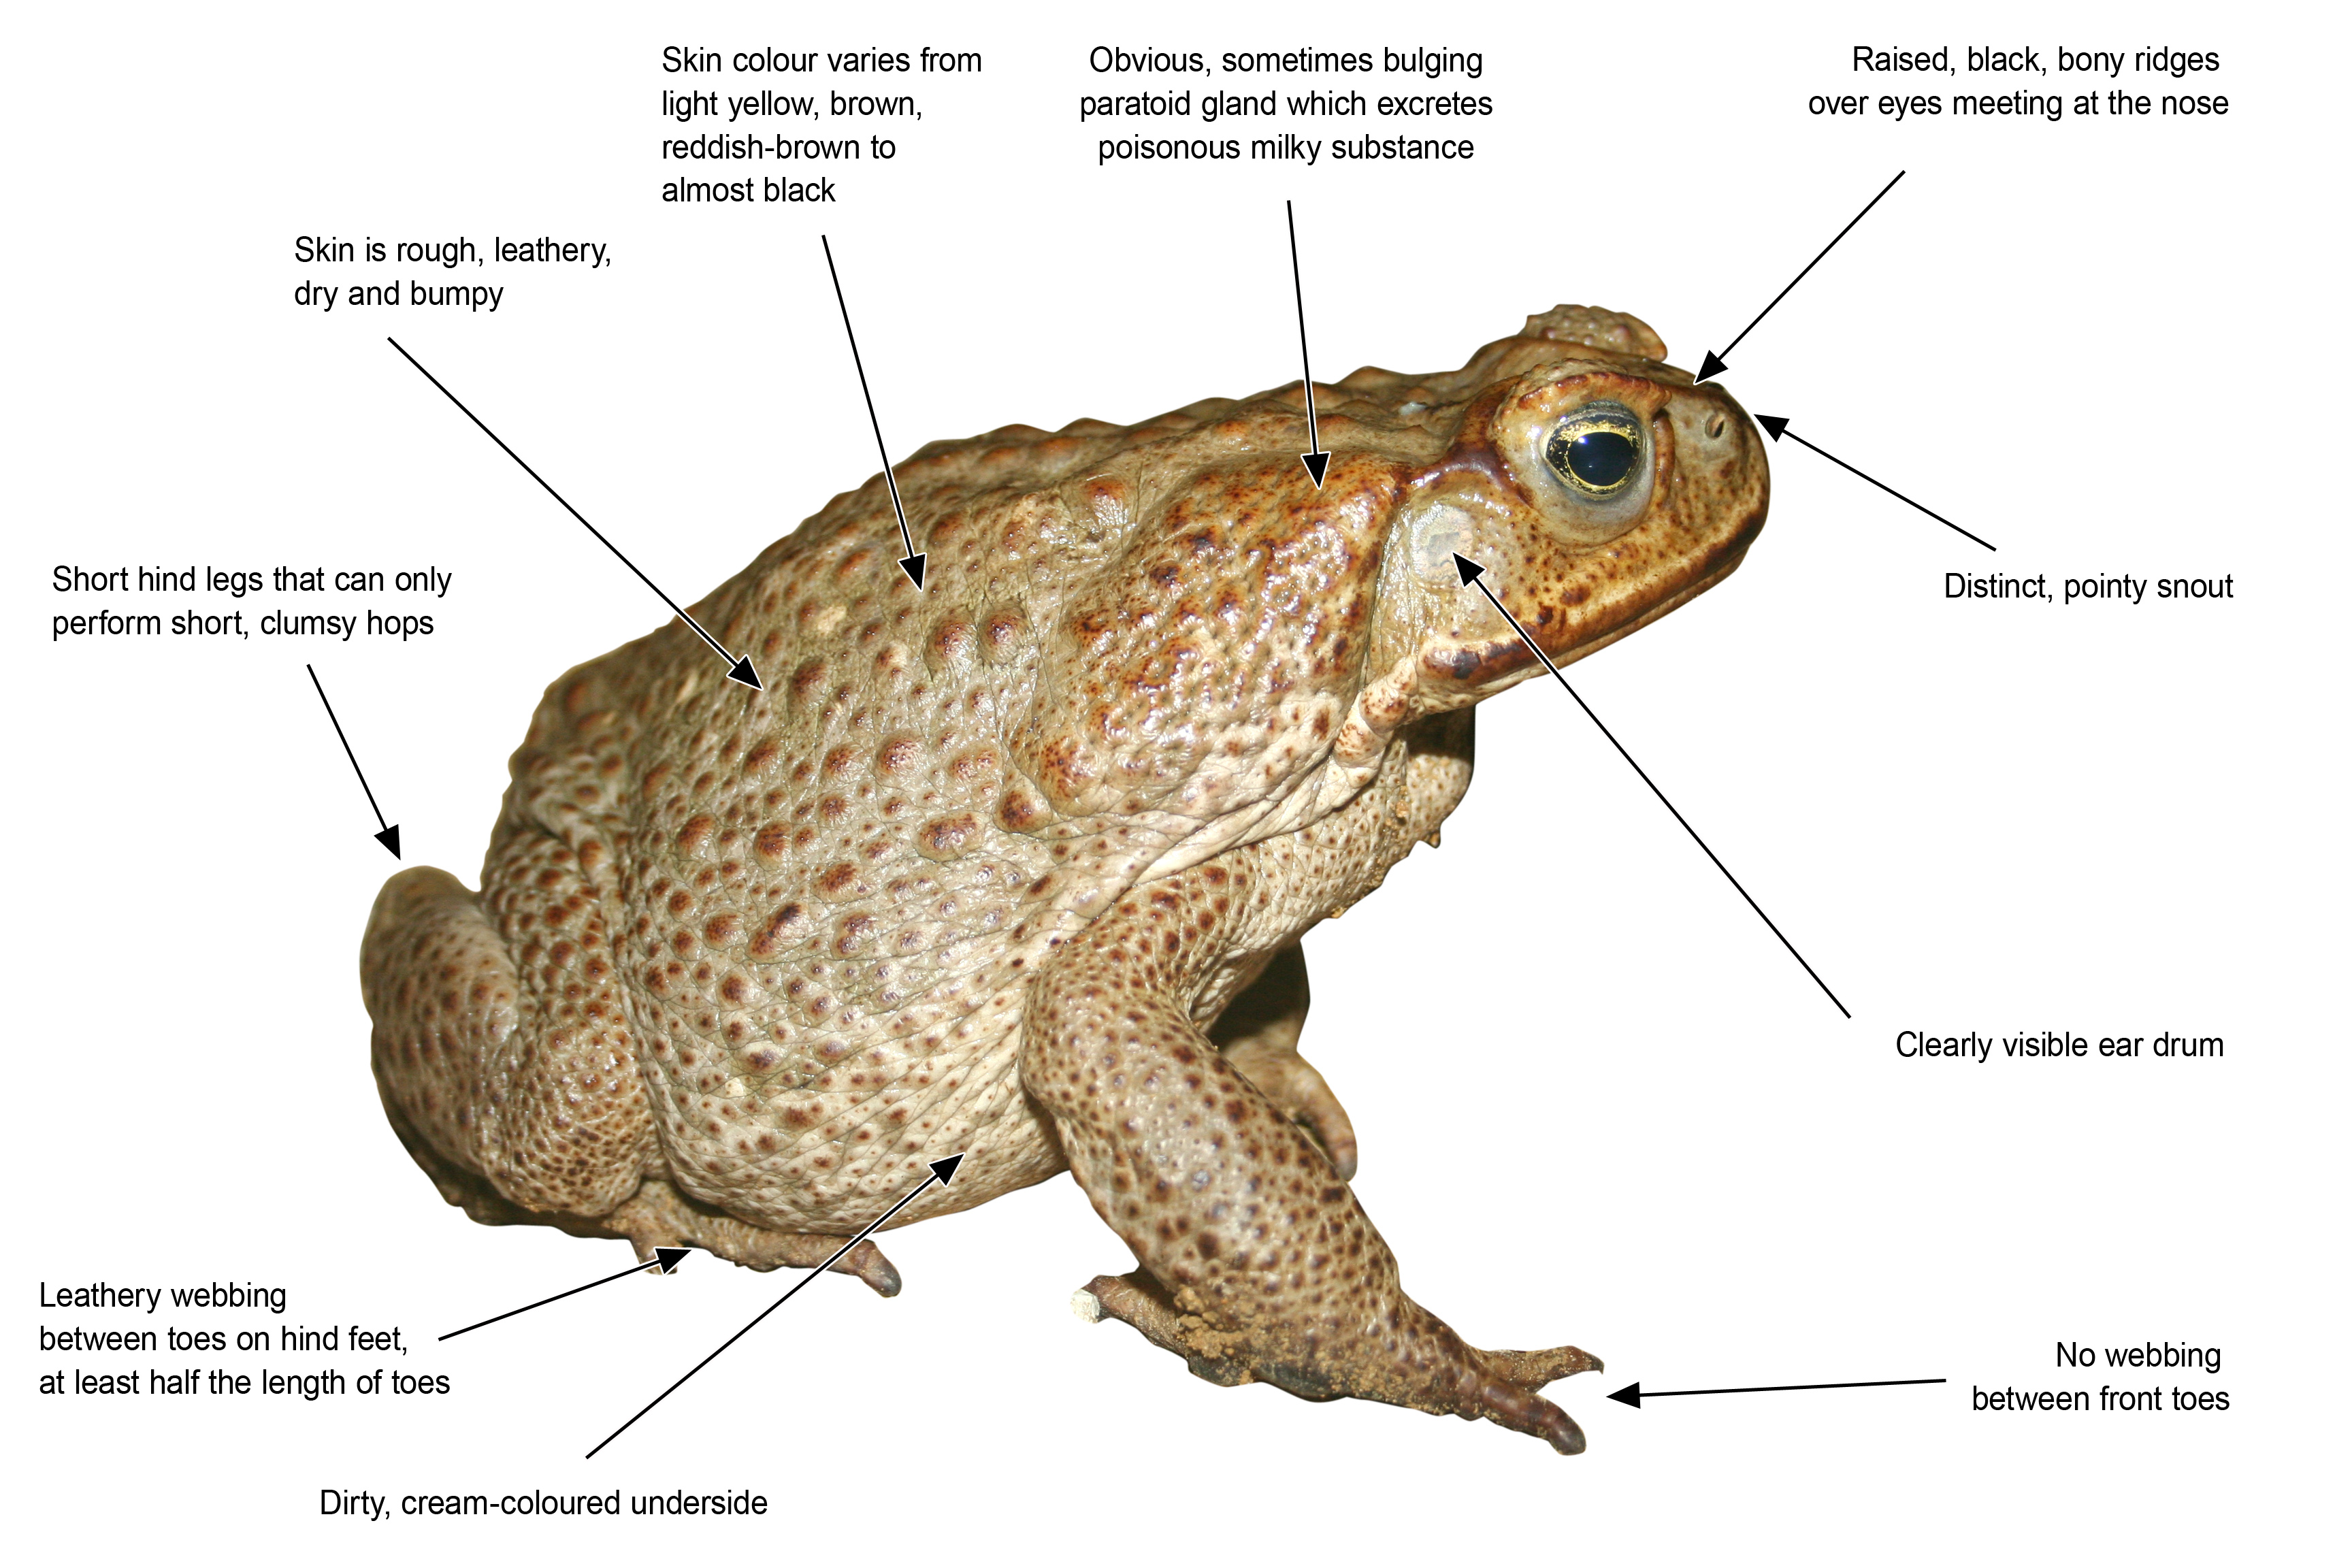  Diagram of cane toad characteristics described in text to follow